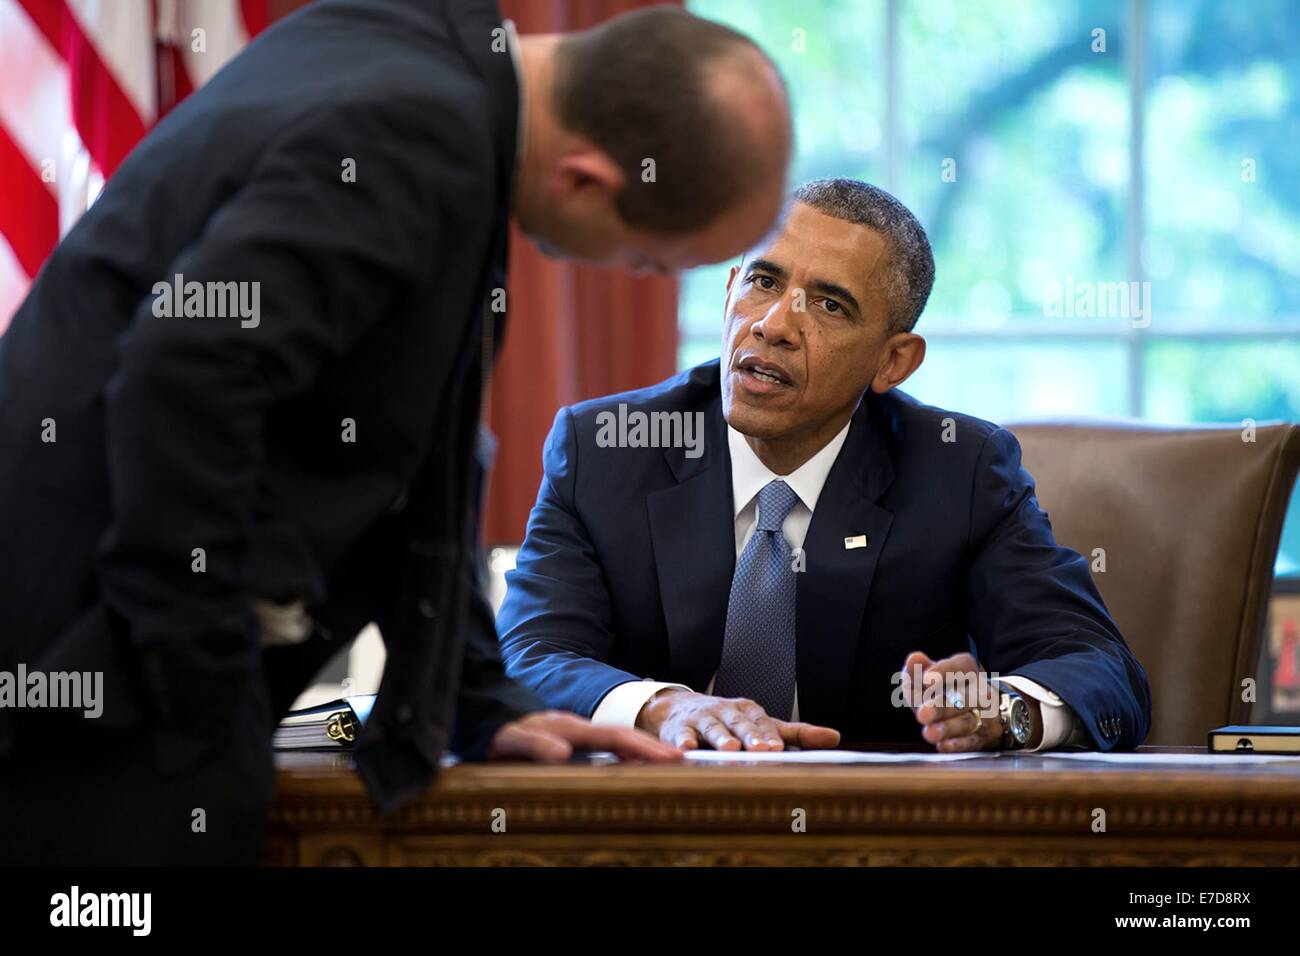 US President Barack Obama confers with Ben Rhodes, Deputy National Security Advisor for Strategic Communications, before delivering a statement on the situation in Ukraine in the Oval Office of the White House July 21, 2014 in Washington, DC. Stock Photo